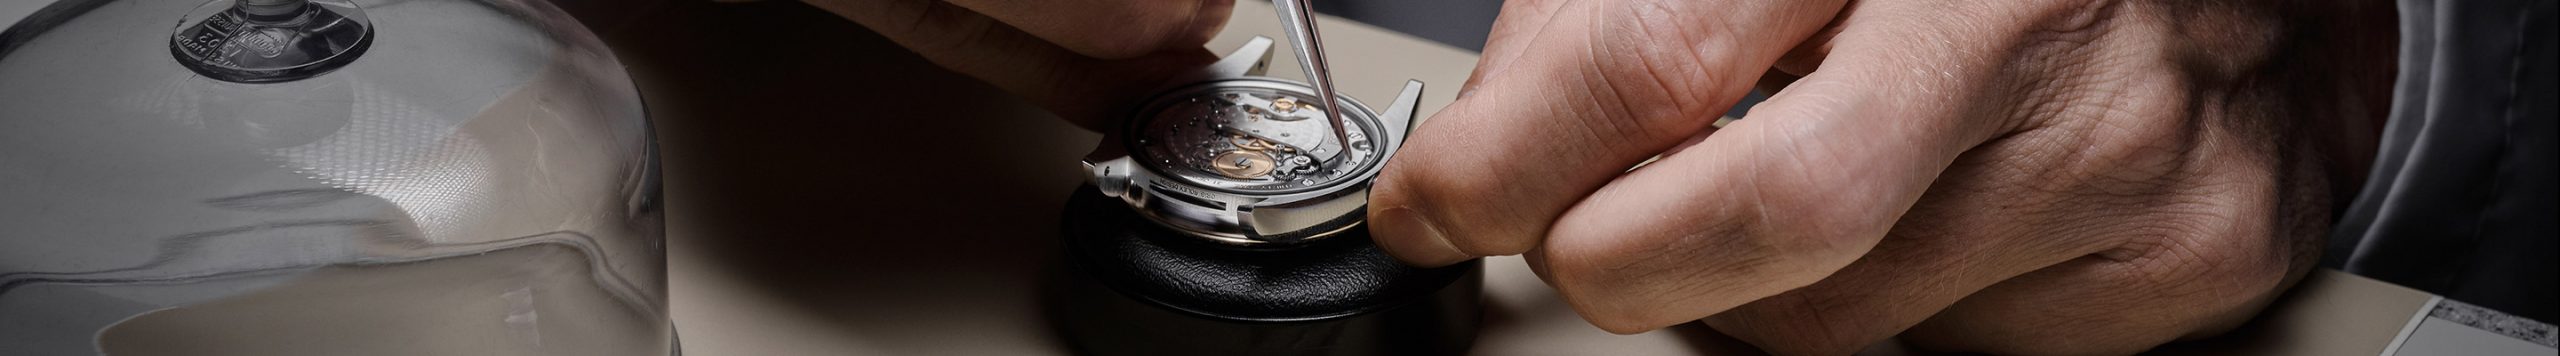 servicing-your-rolex-image-banner-01